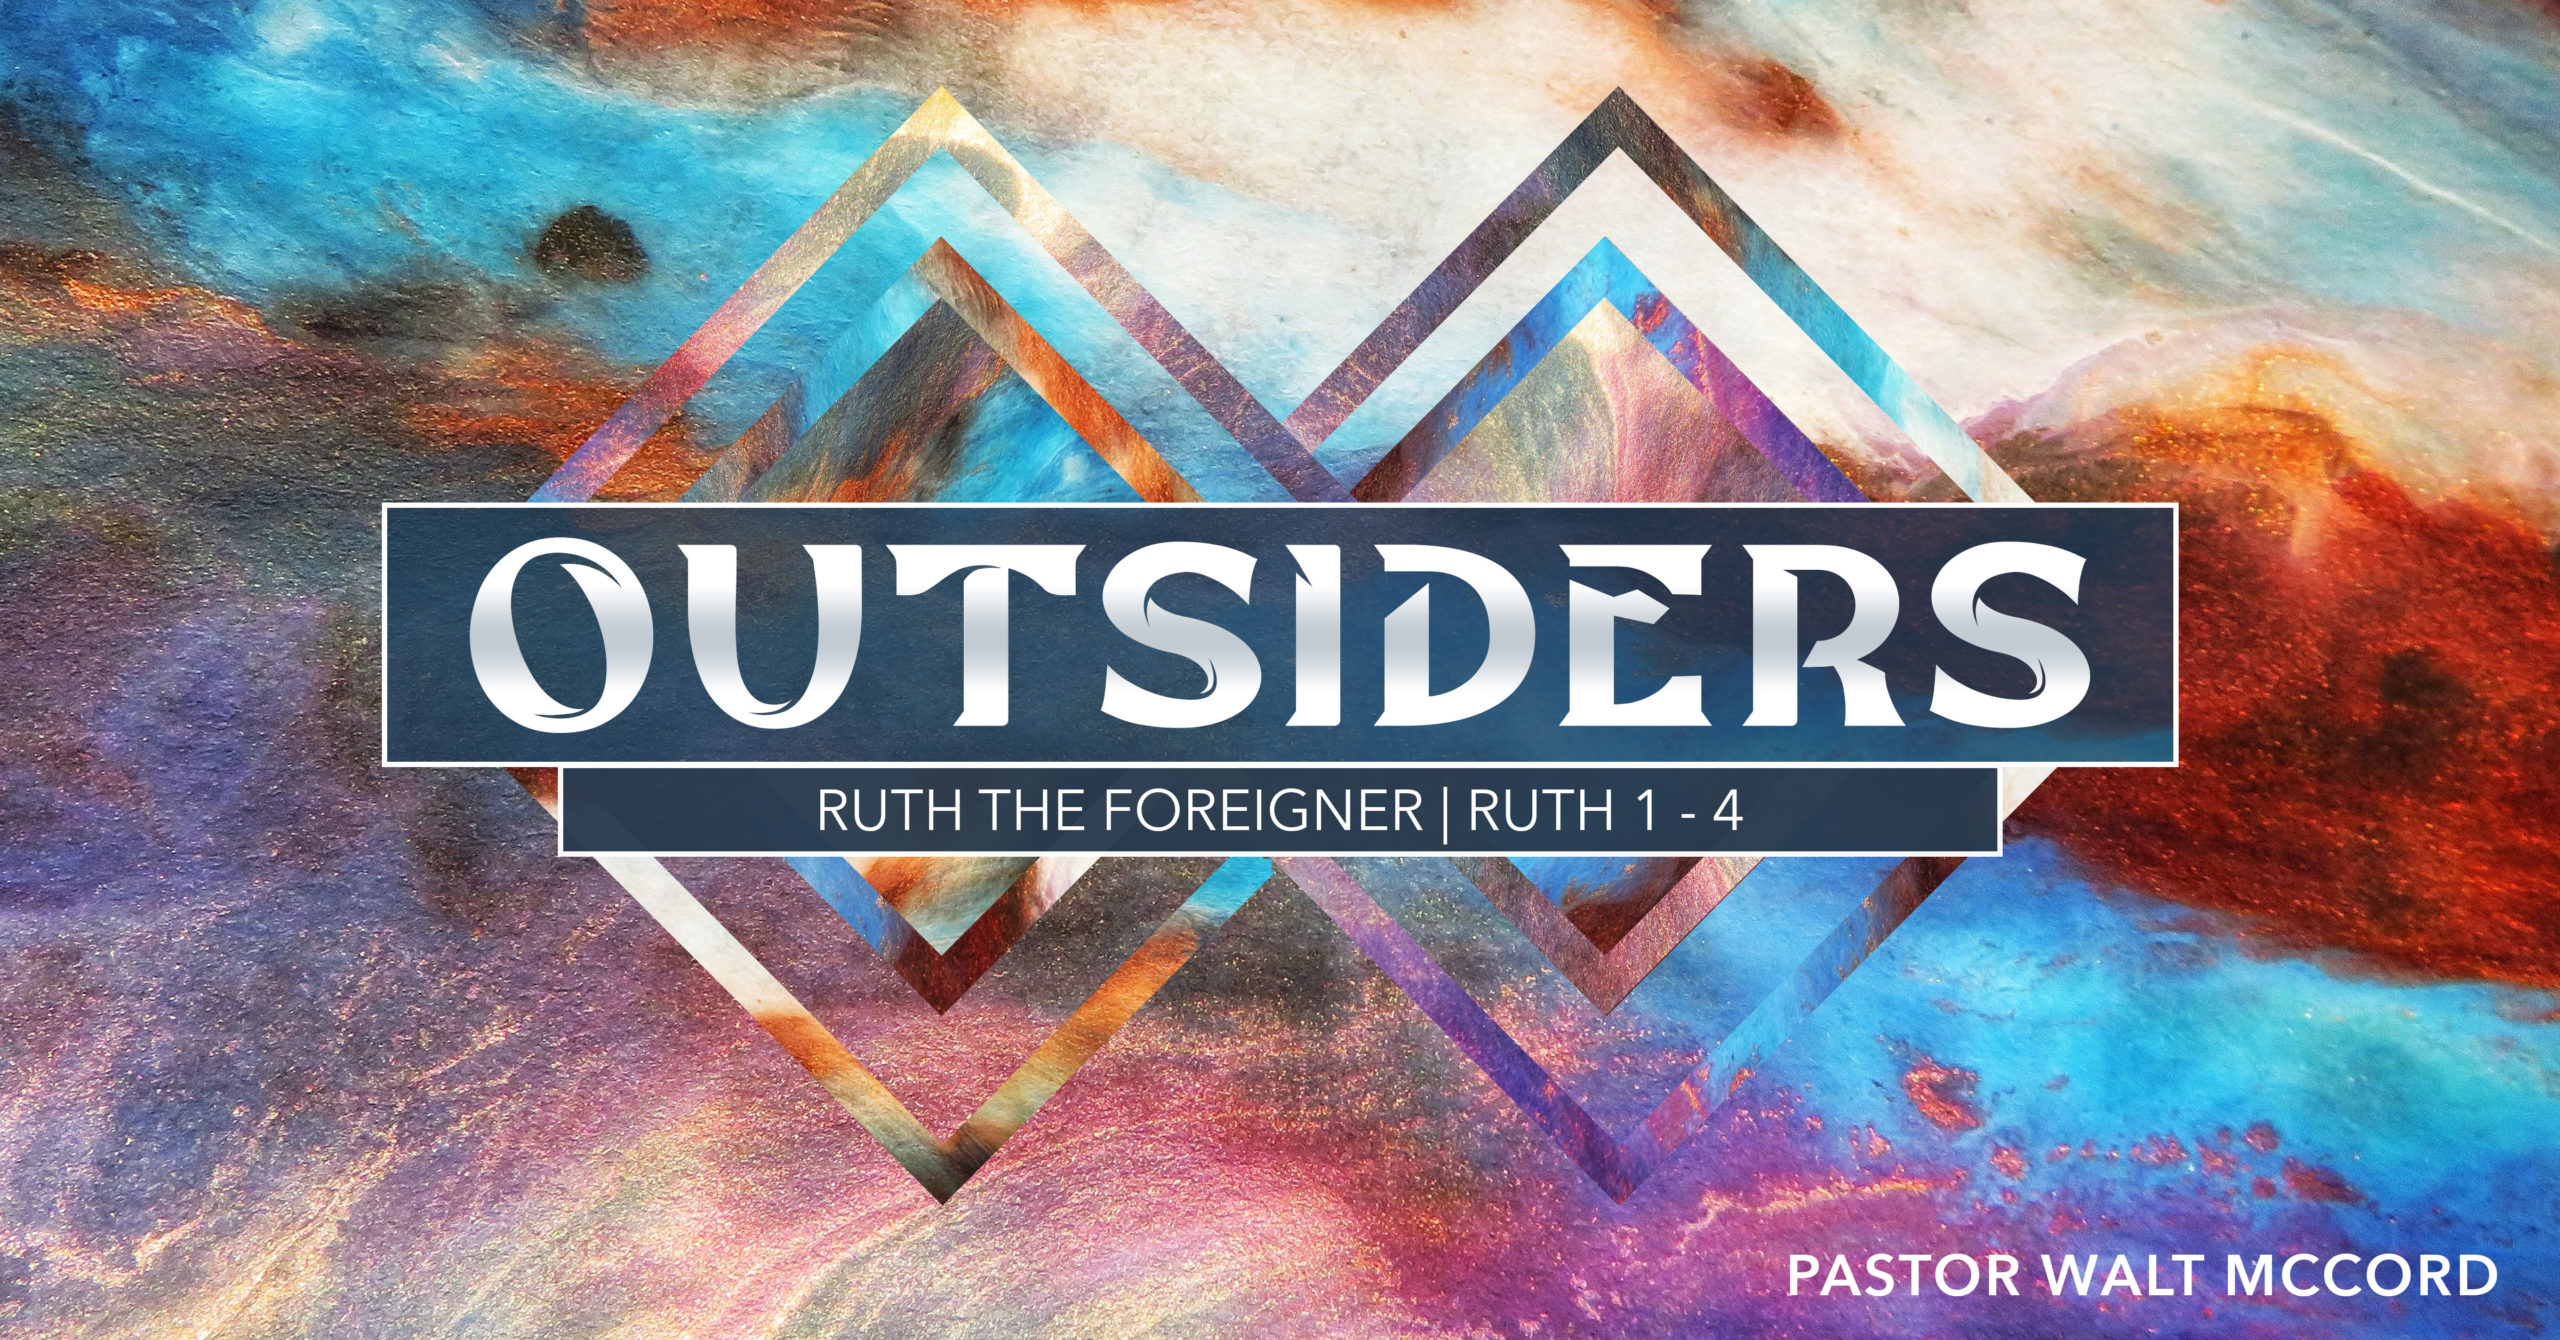 Outsiders: Ruth the Foreigner